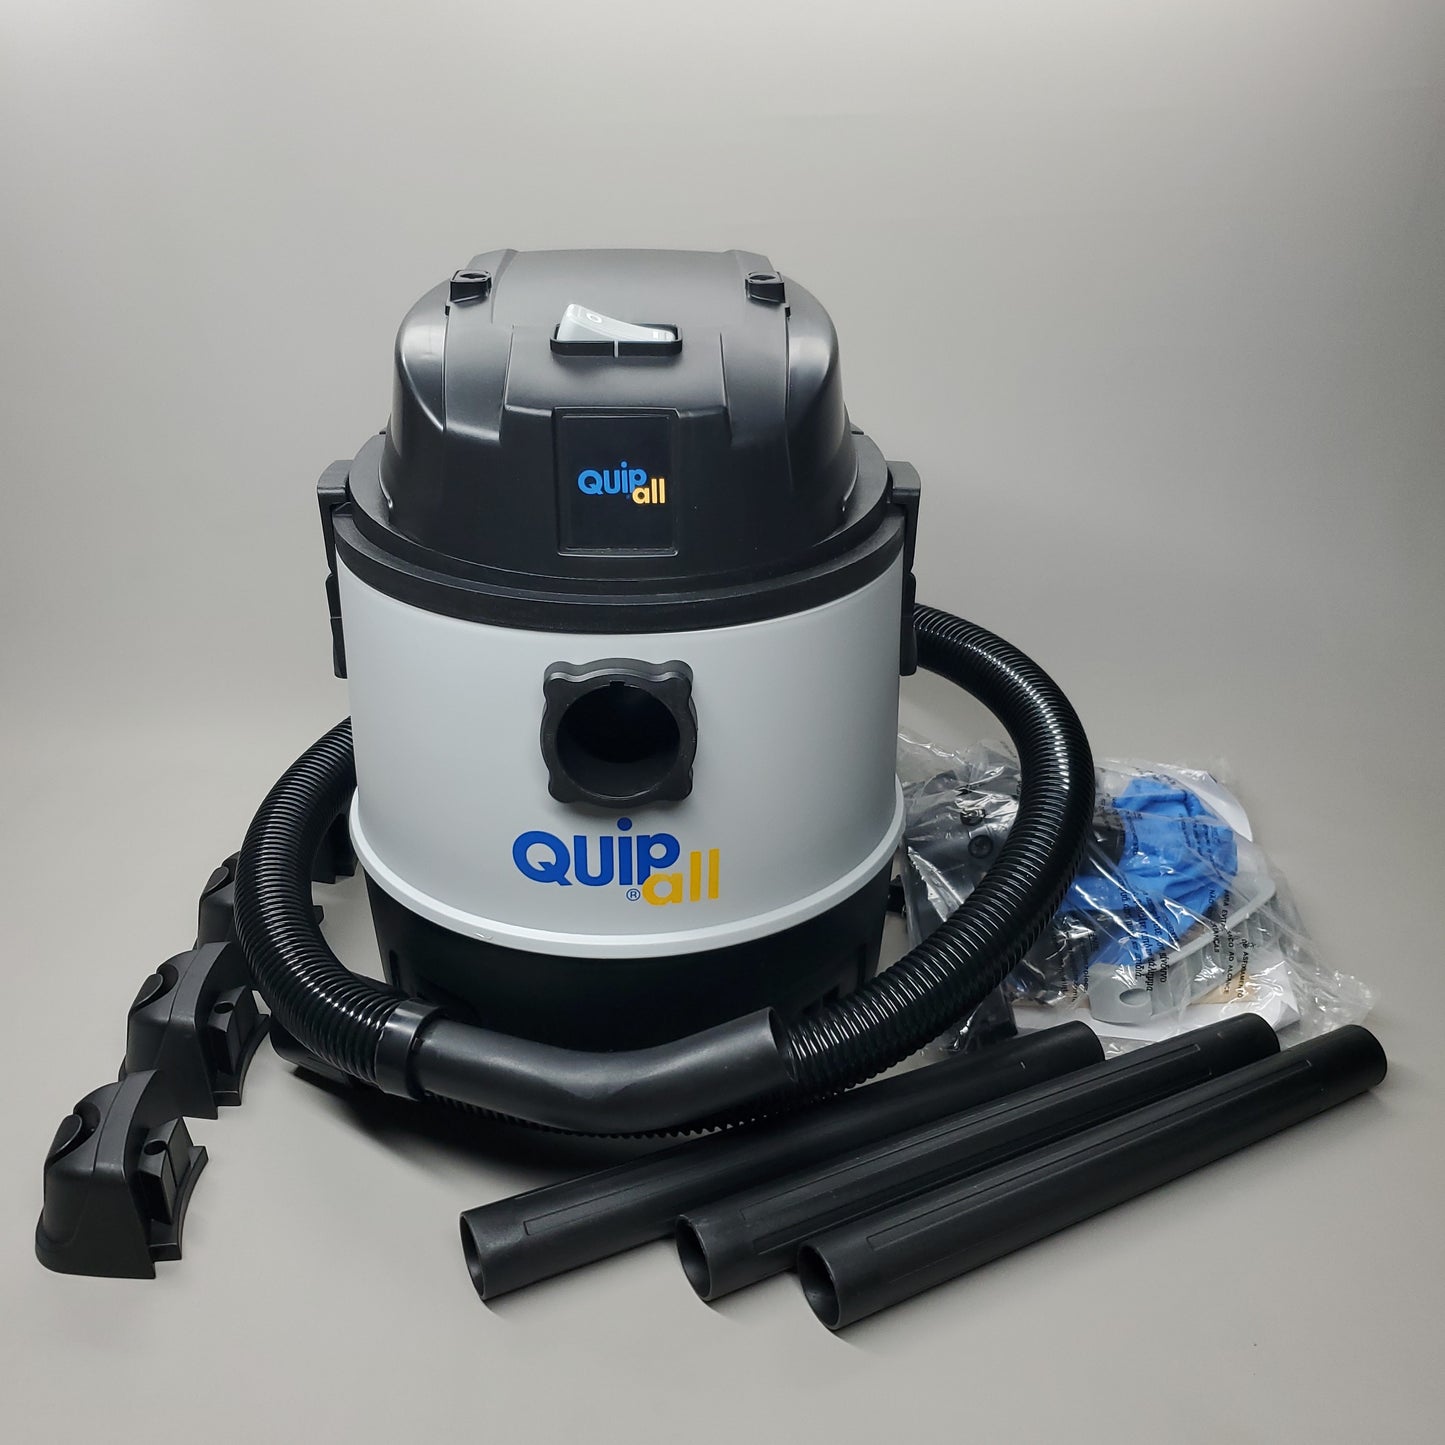 QUIPALL Portable Wet And Dry Vacuum Cleaner 3.2 Gallons Plastic Tank EC813-1000 (New)